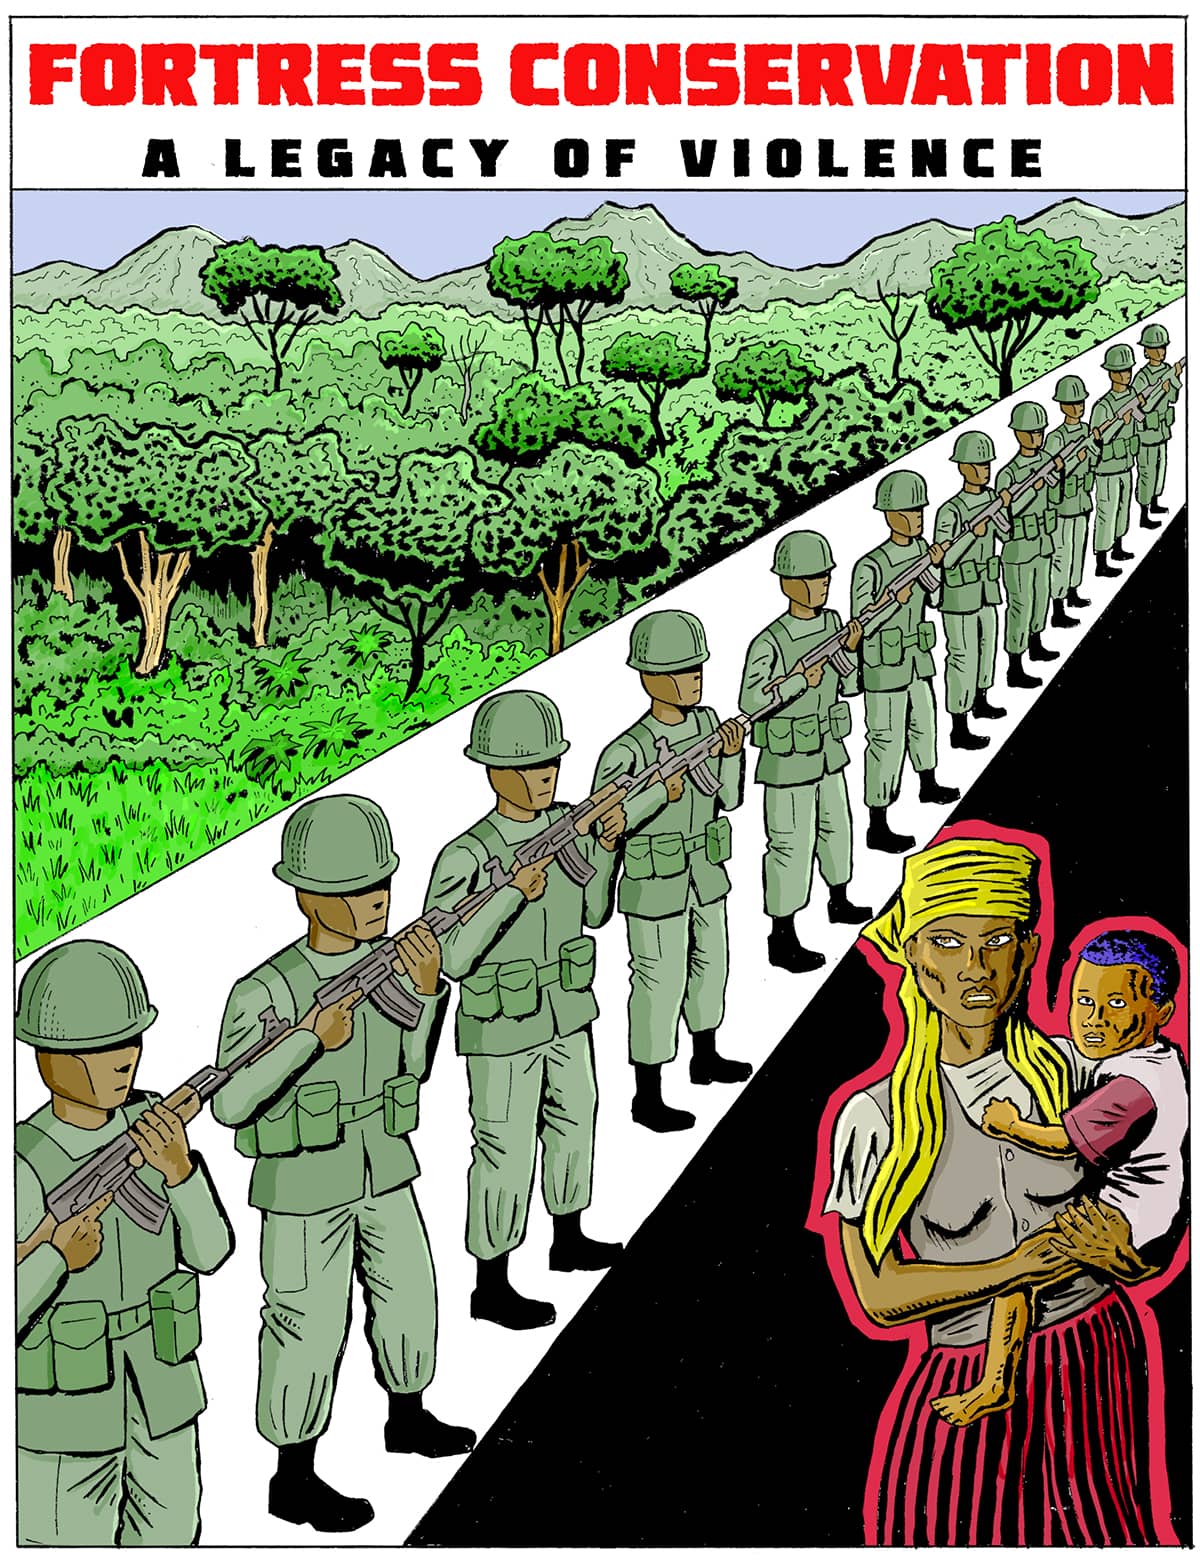 An illustrated panel showing trees an grass on top, a diagonal line of soldiers holding guns in the middle, and a woman holding a young child at the bottom. Text: Fortress Conservation: A legacy of violence